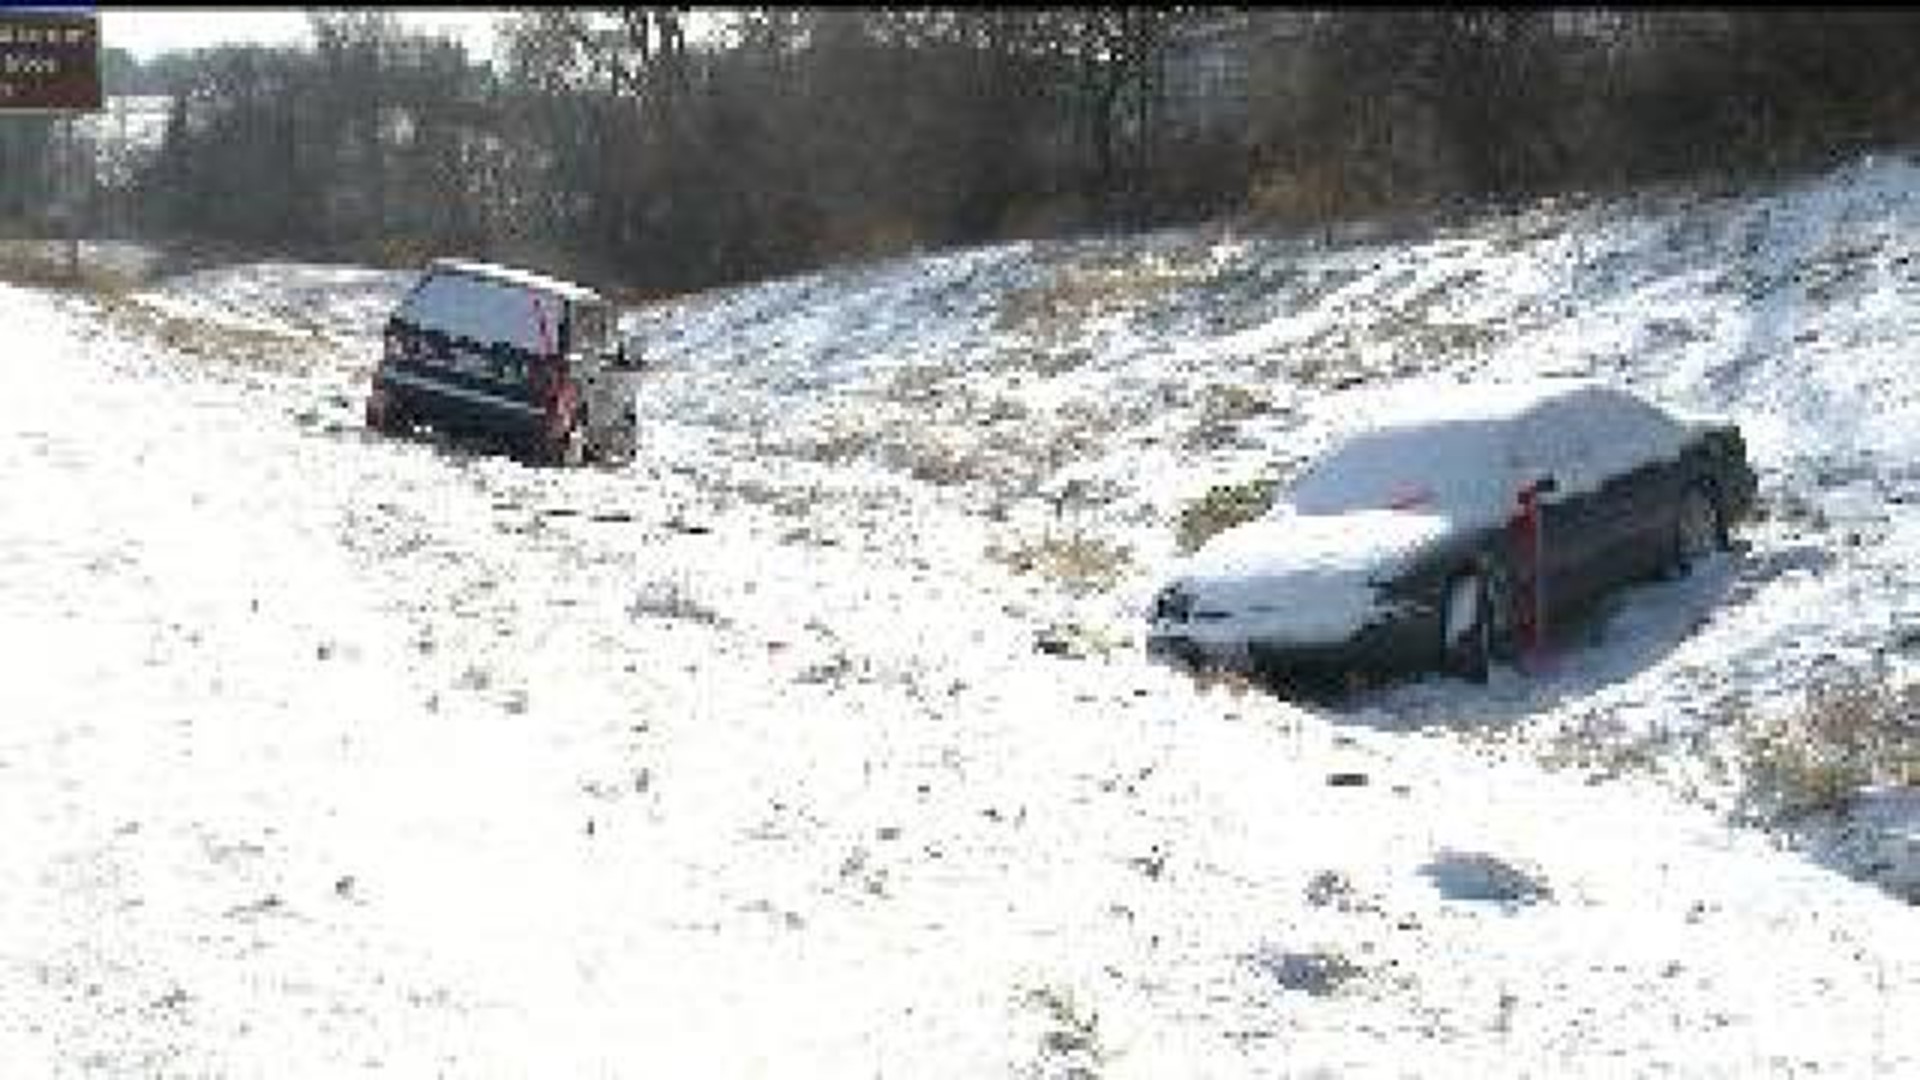 Cars still stranded 24 hours after snow storm